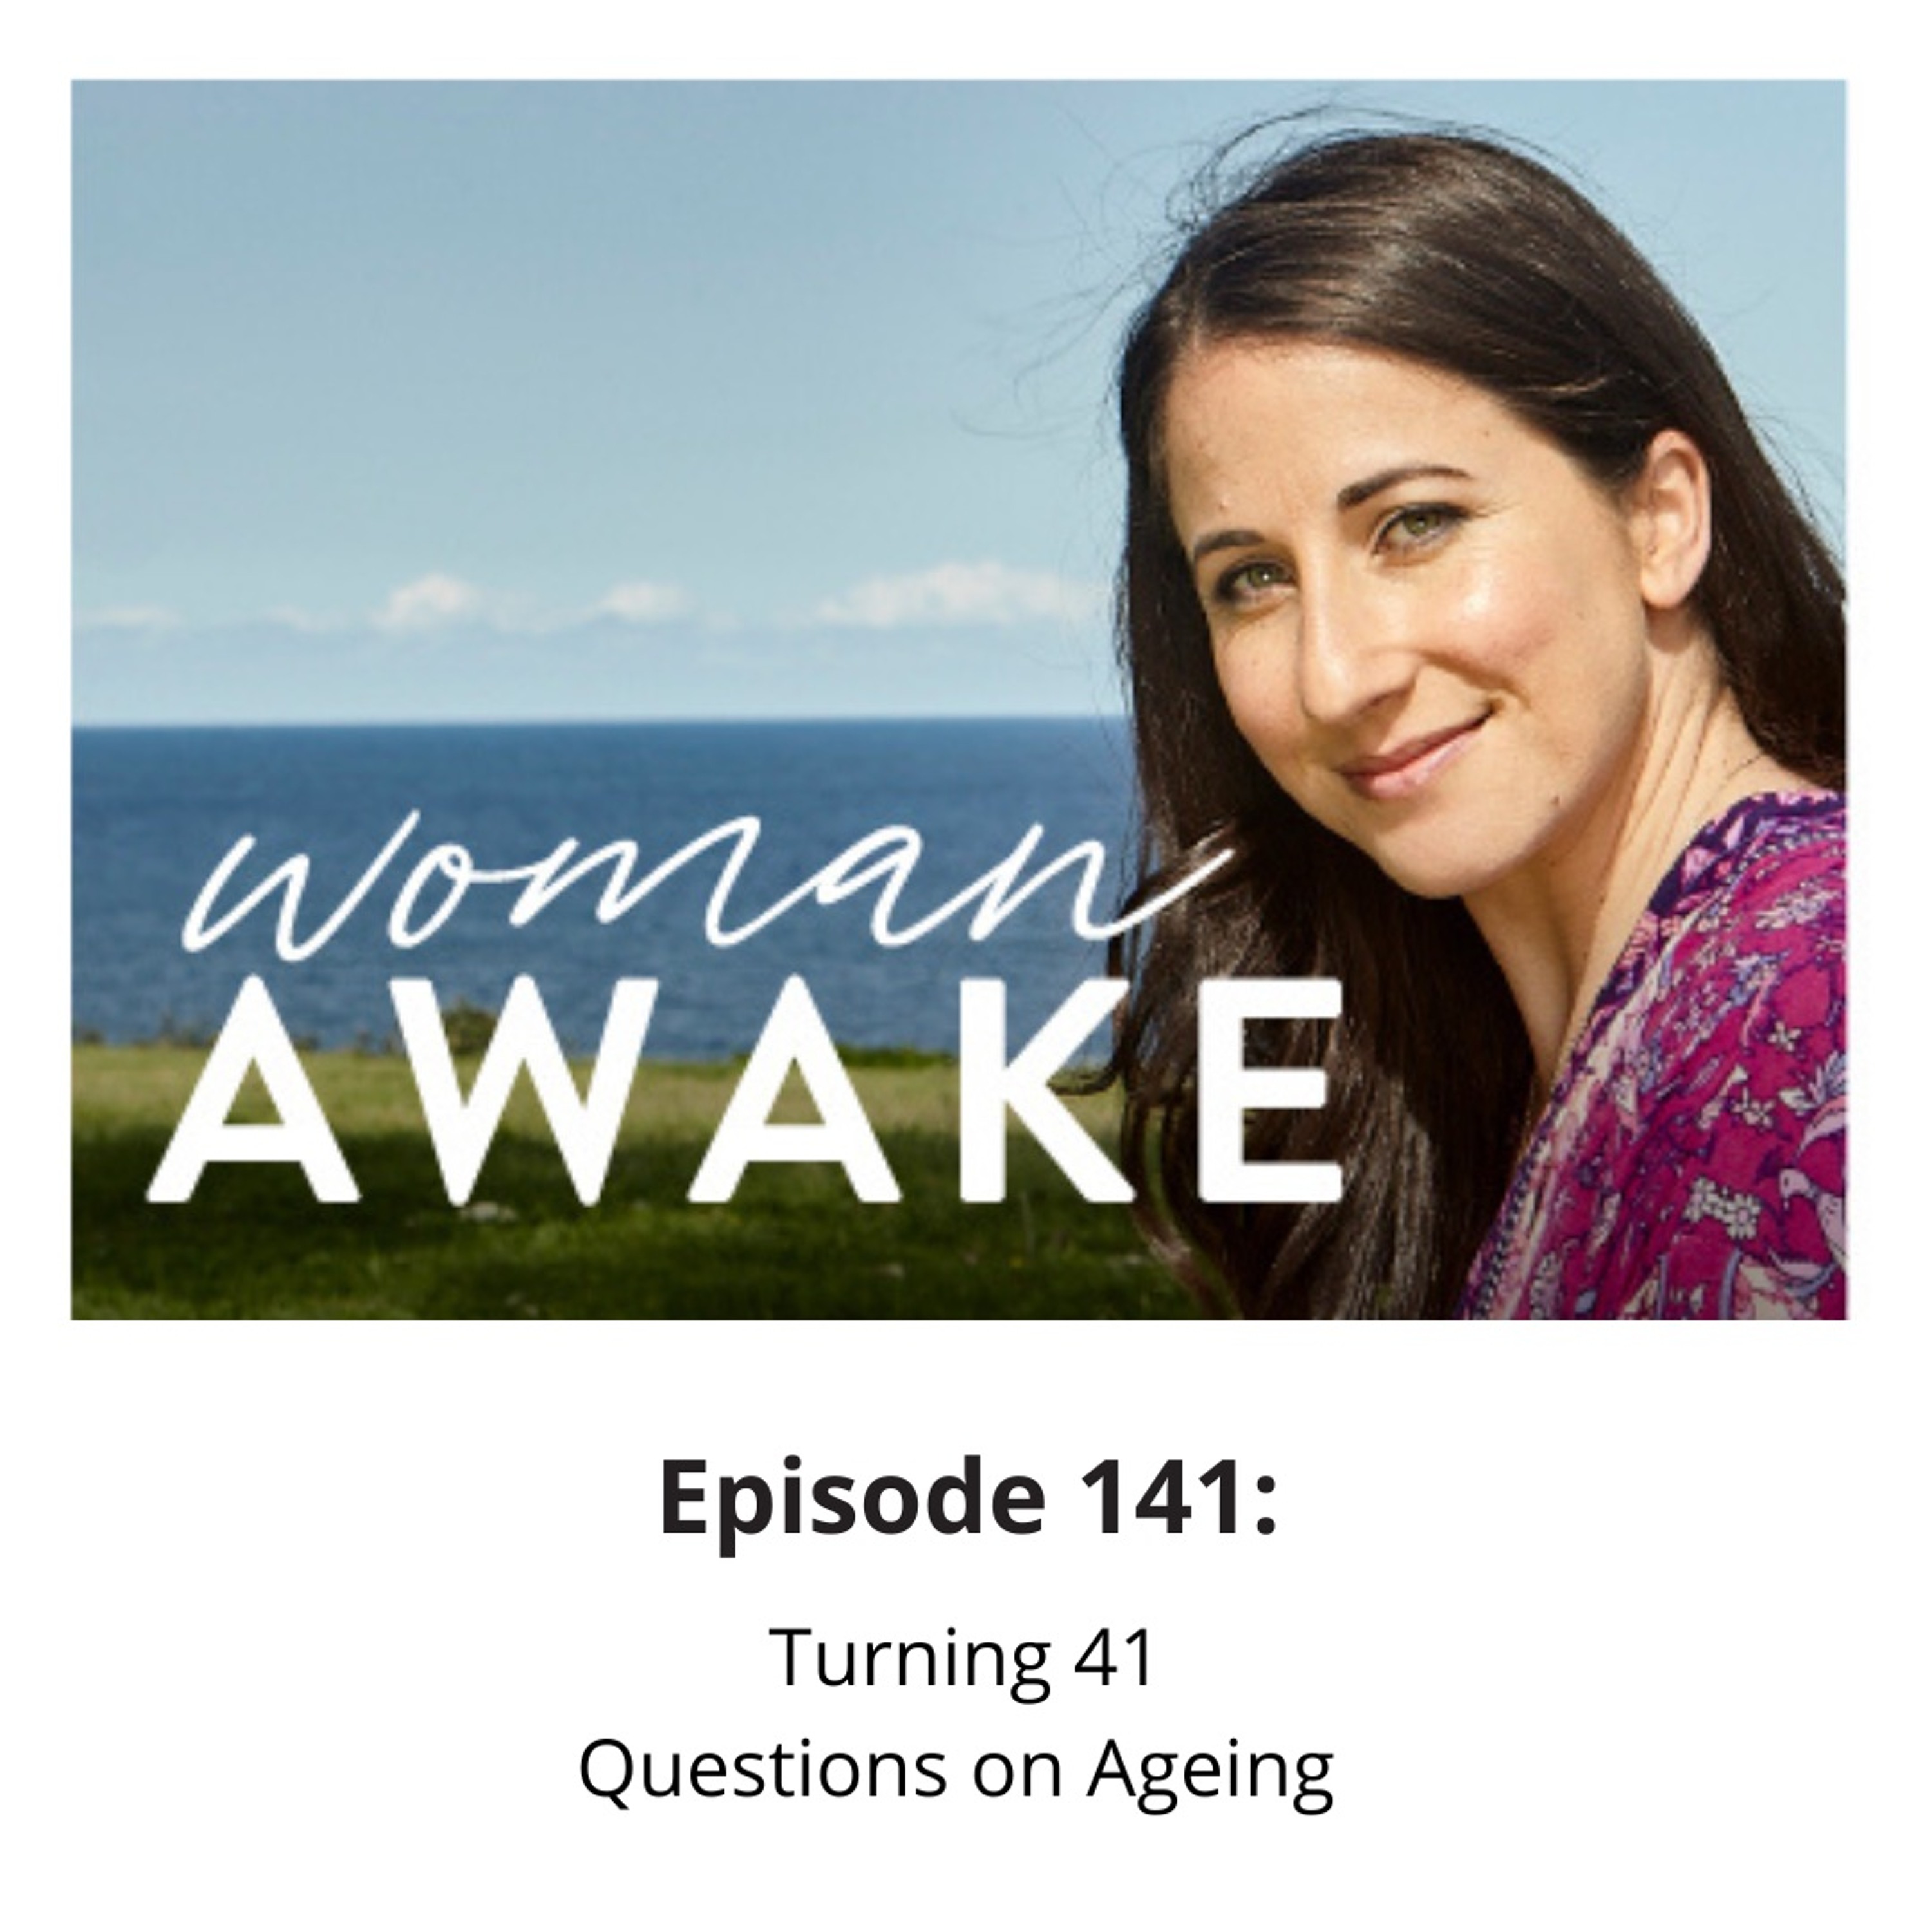 Woman Awake Episode 141 - Turning 41 Questions On Ageing